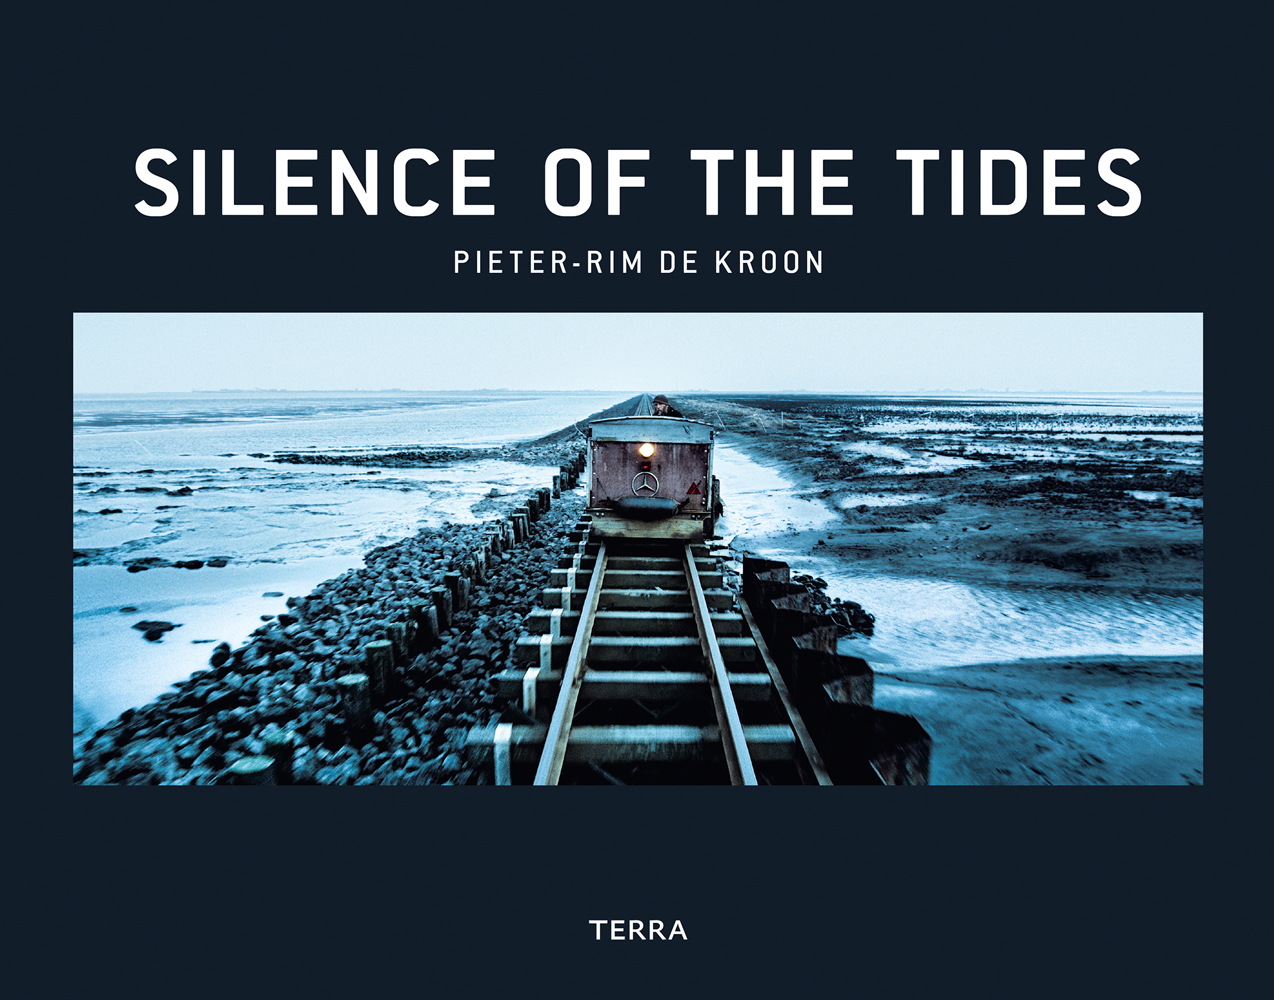 Rail road and embankment on Wadden Sea, wagon with lamp on front, on black cover of 'Silence of the Tides', by Lannoo Publishers.